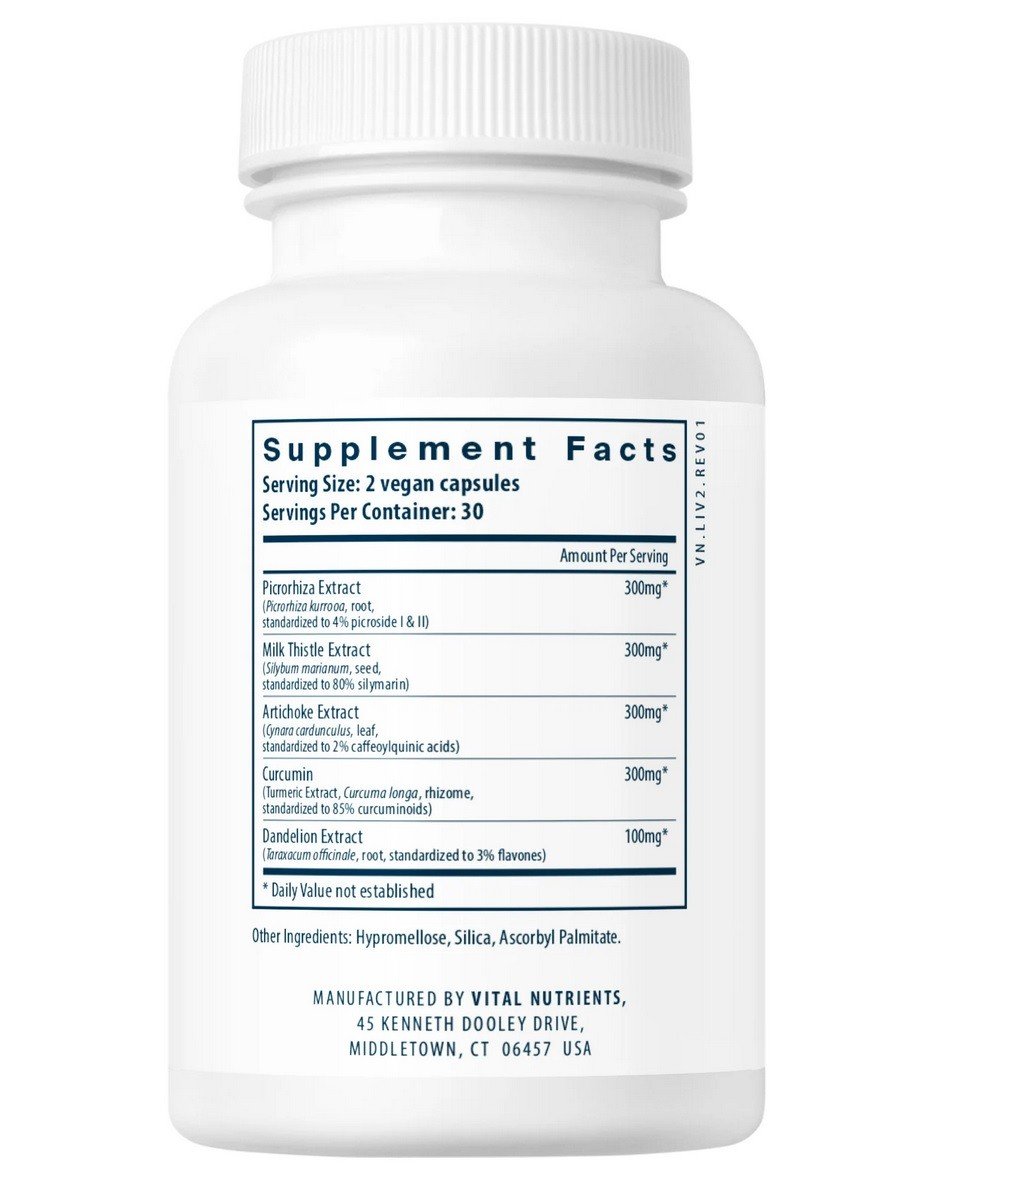 Vital Nutrients Liver Support ll 60 Capsule